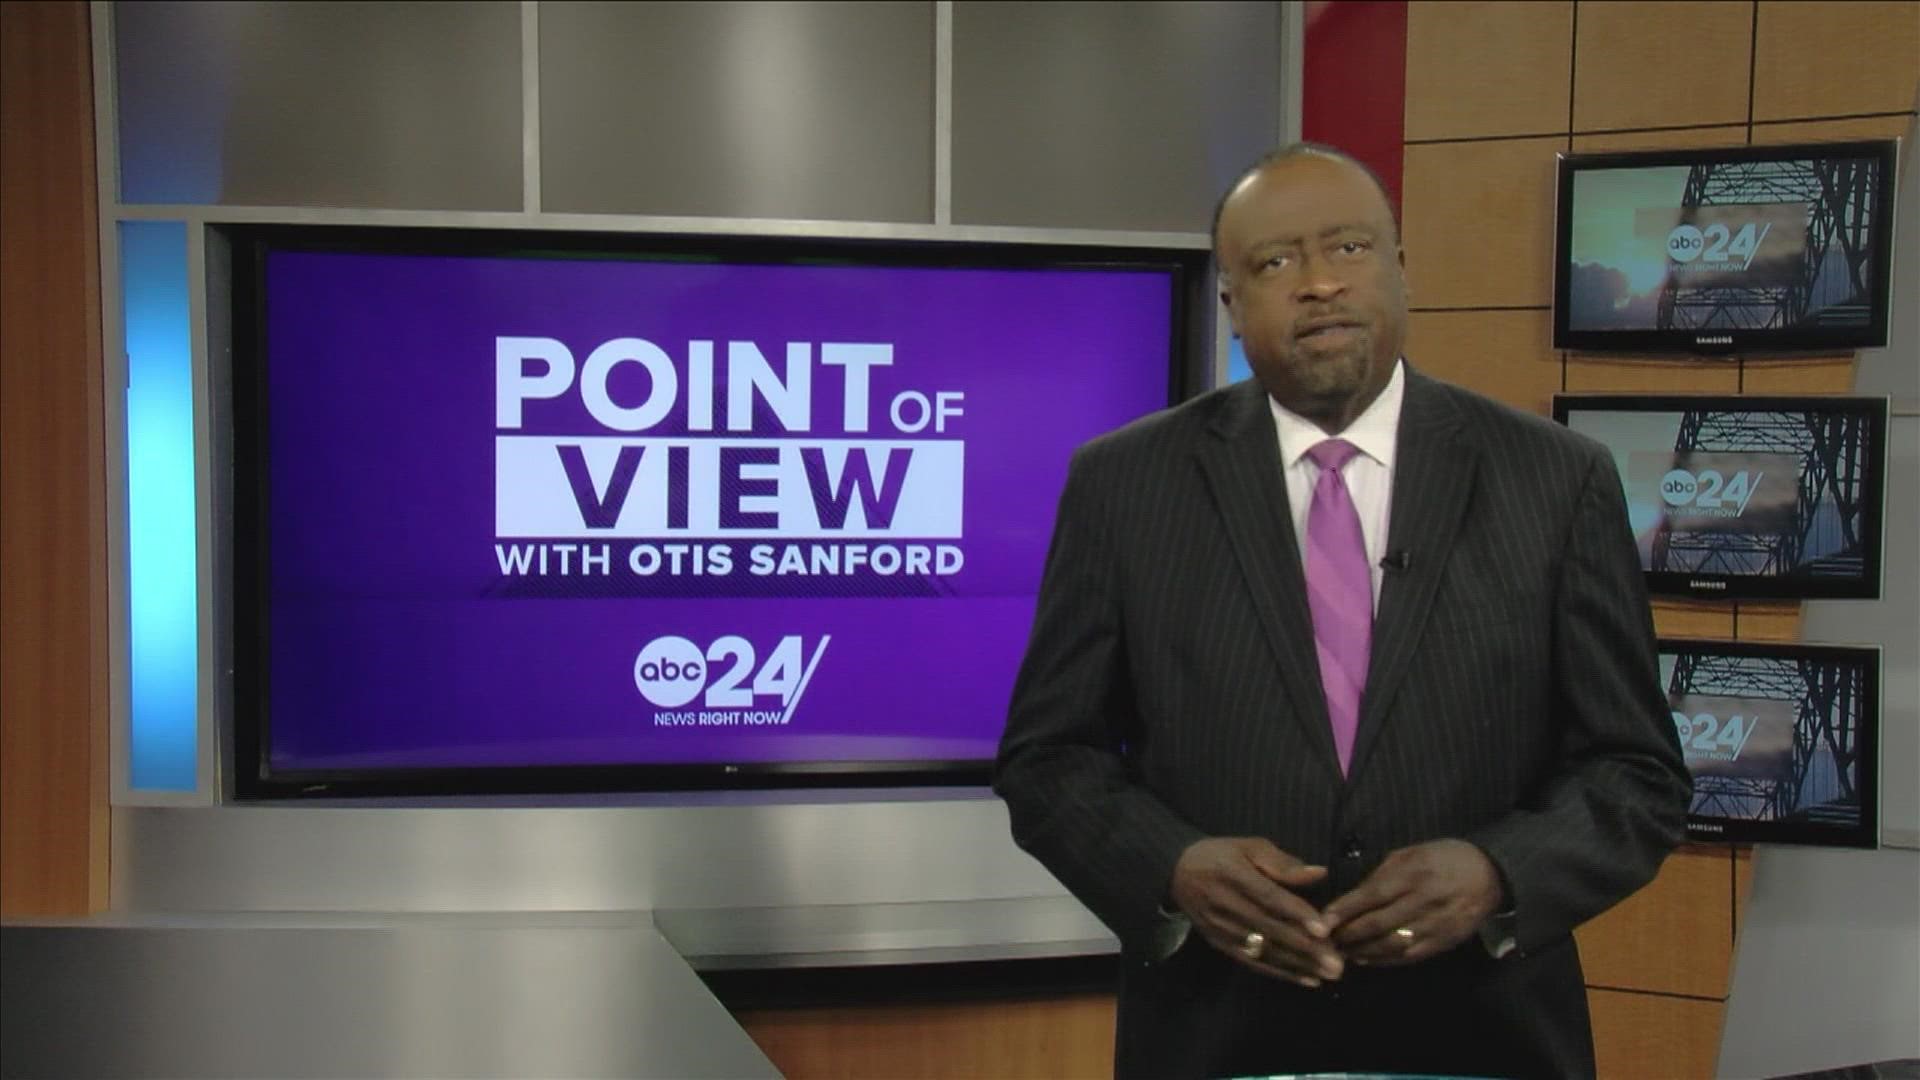 ABC24 political analyst and commentator Otis Sanford shared his point of view on a proposal for partisan city elections being tabled.